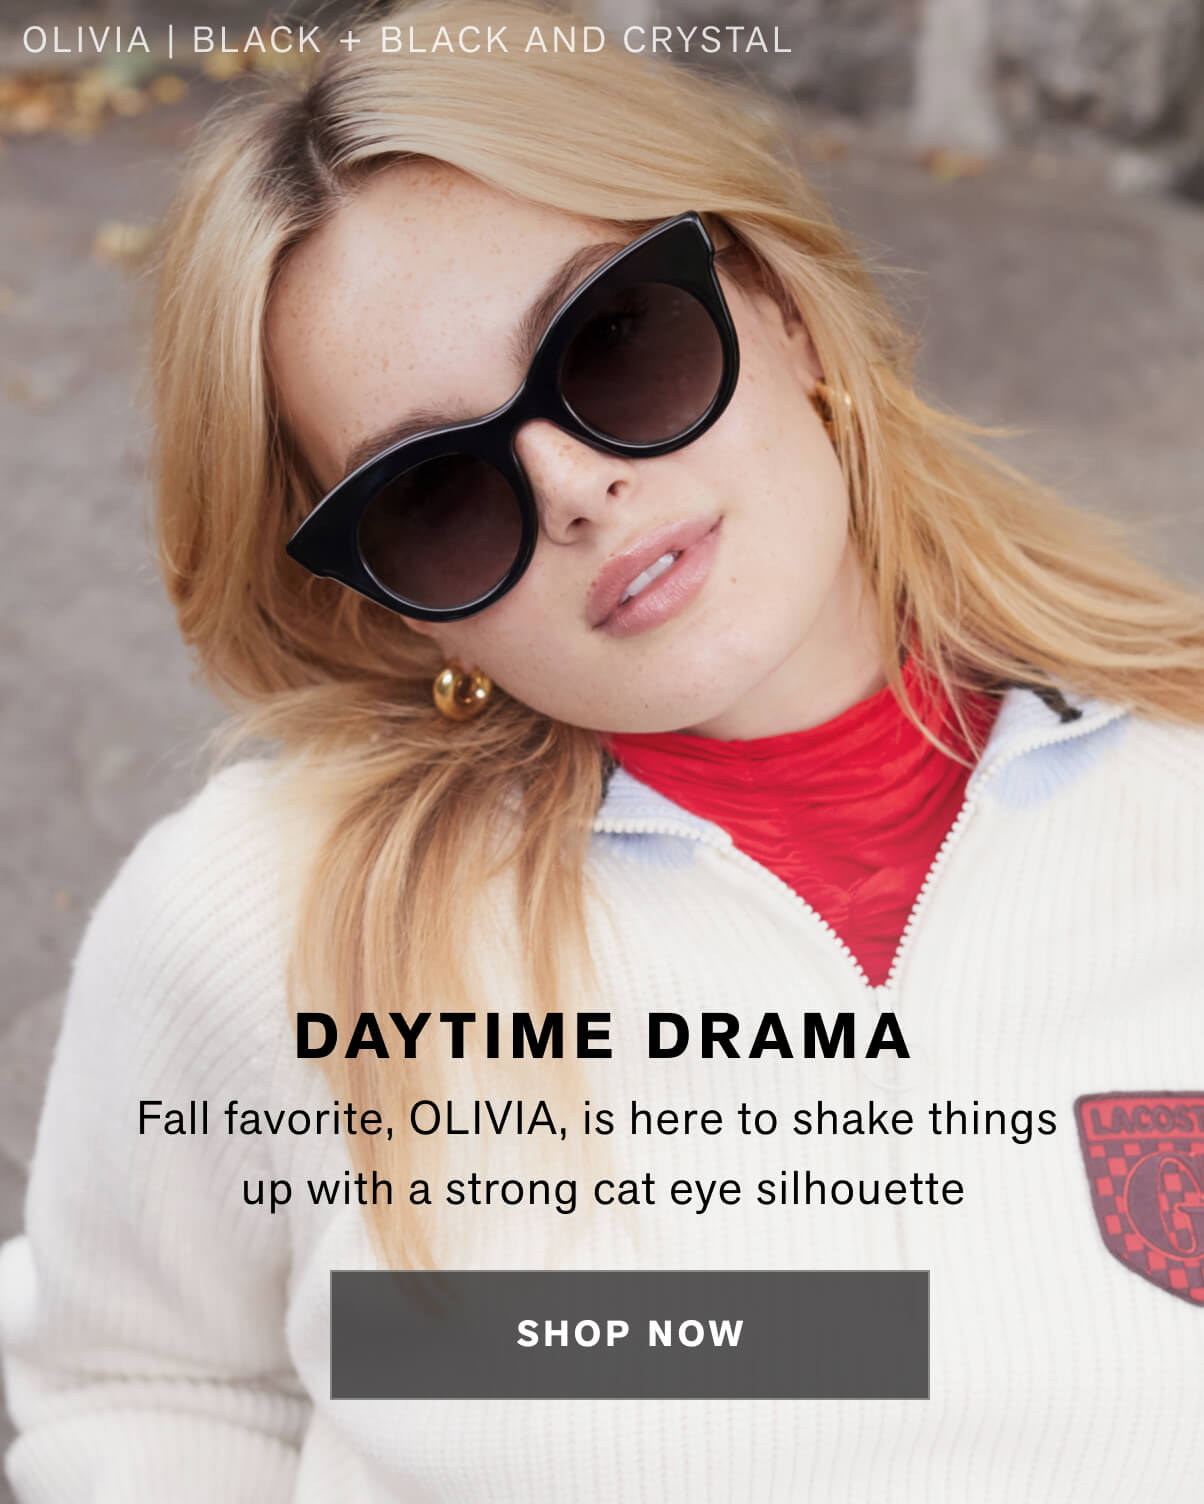 DAYTIME DRAMA  Fall favorite, OLIVIA, is here to shake things up with a strong cat eye silhouette   shop now